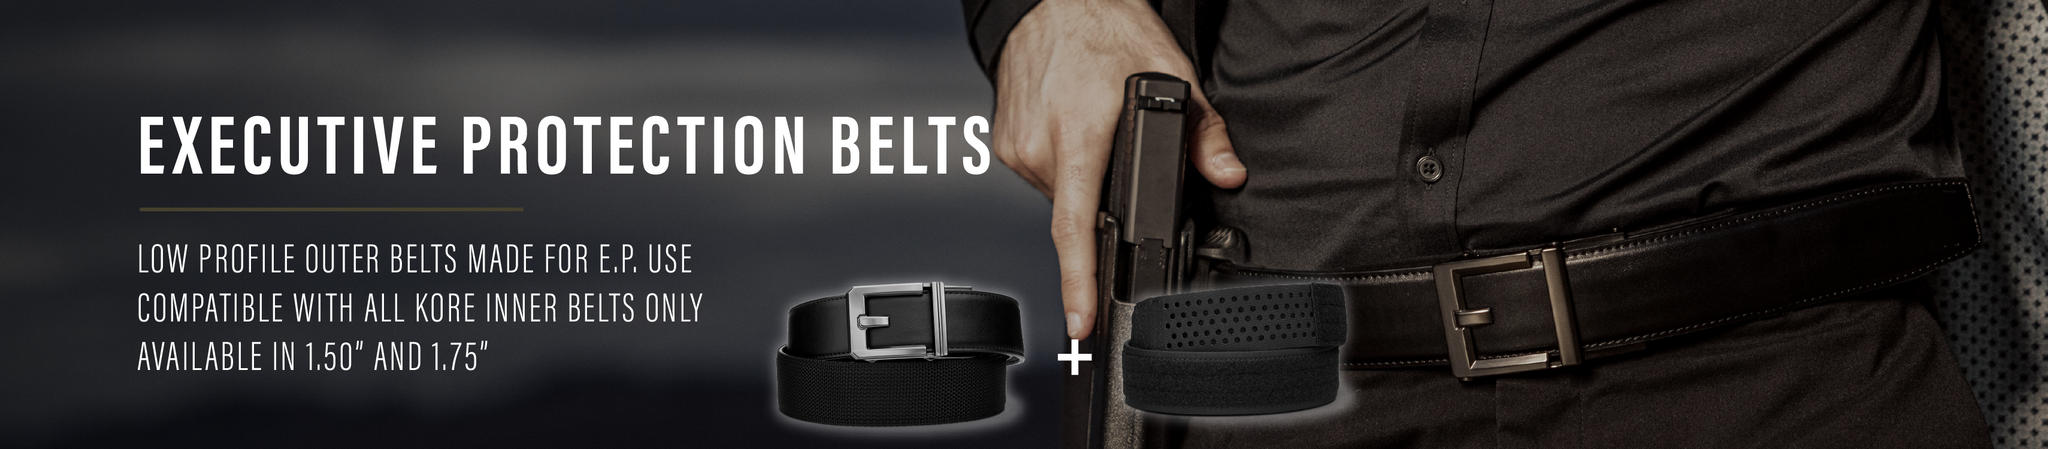 EXECUTIVE PROTECTION BELTS